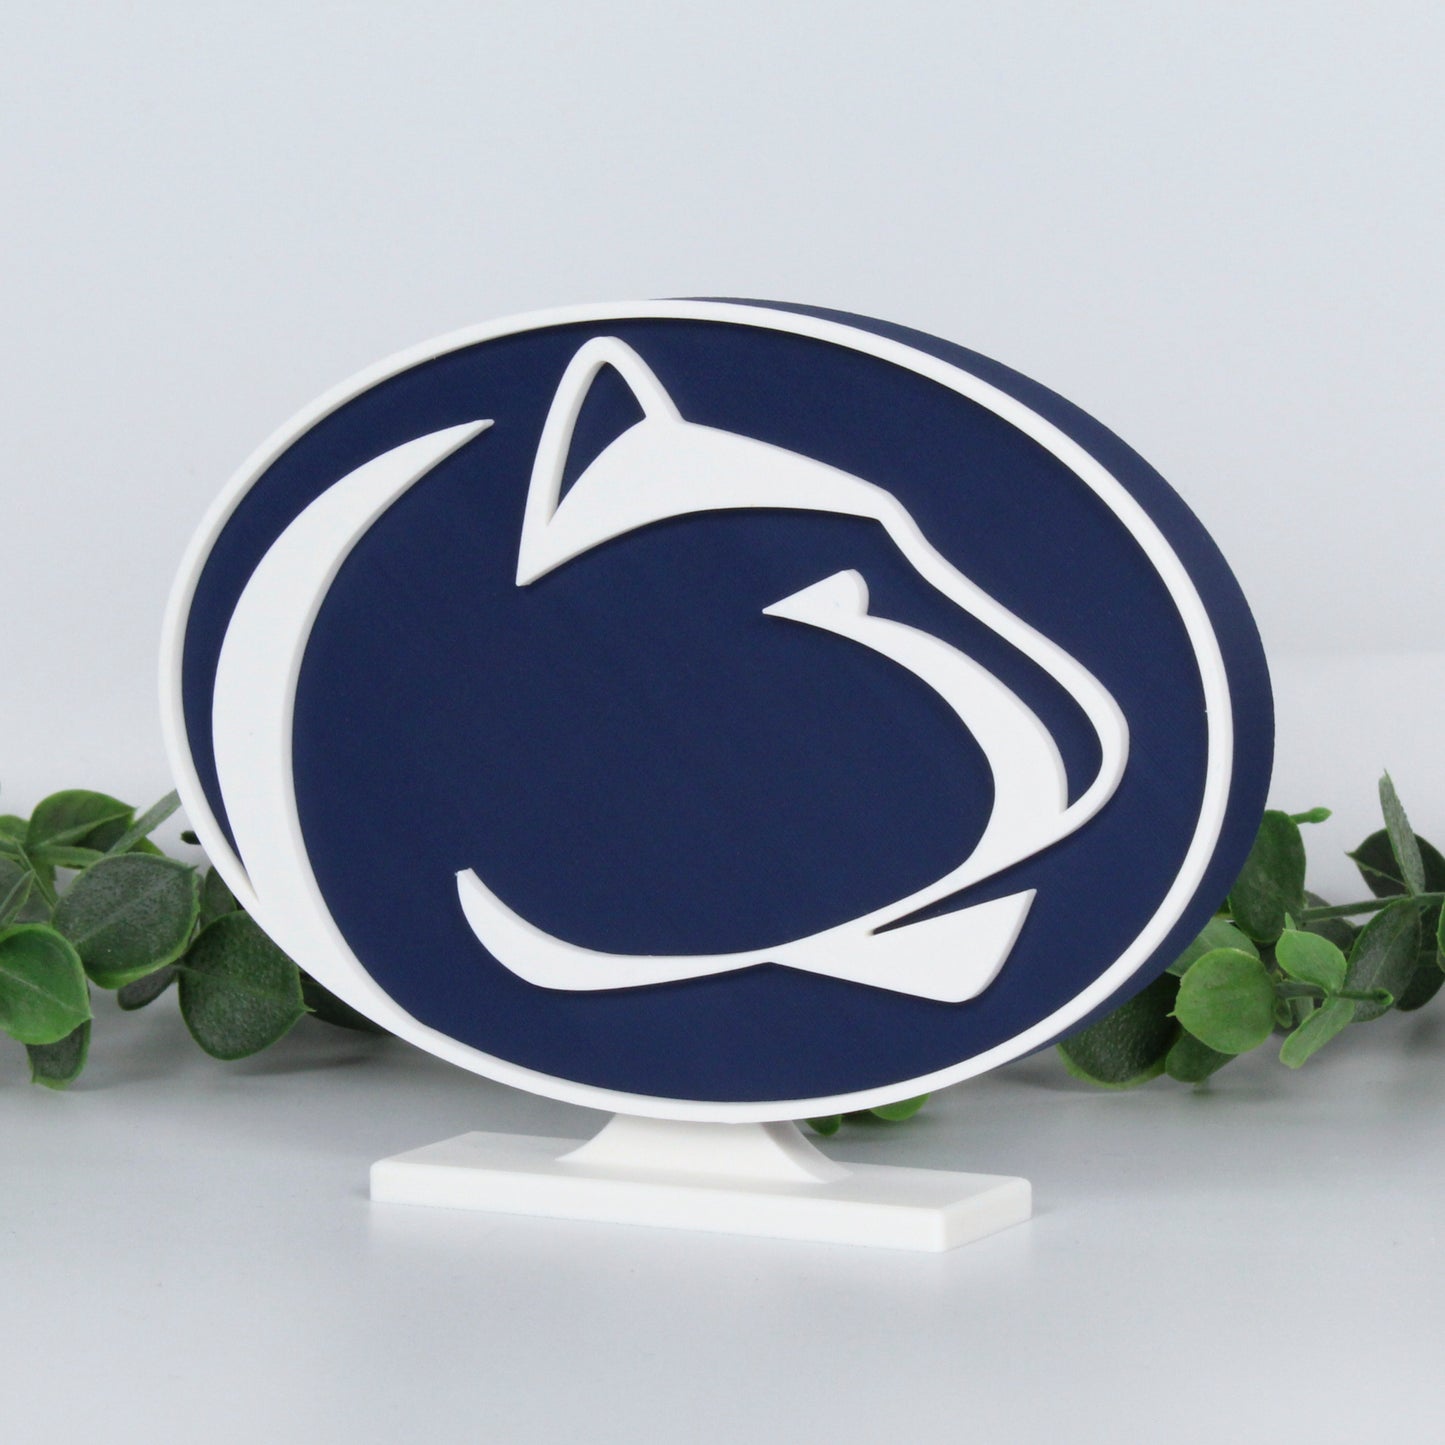 Pennsylvania State University Nittany Lions 3D Printed Graduation Gift